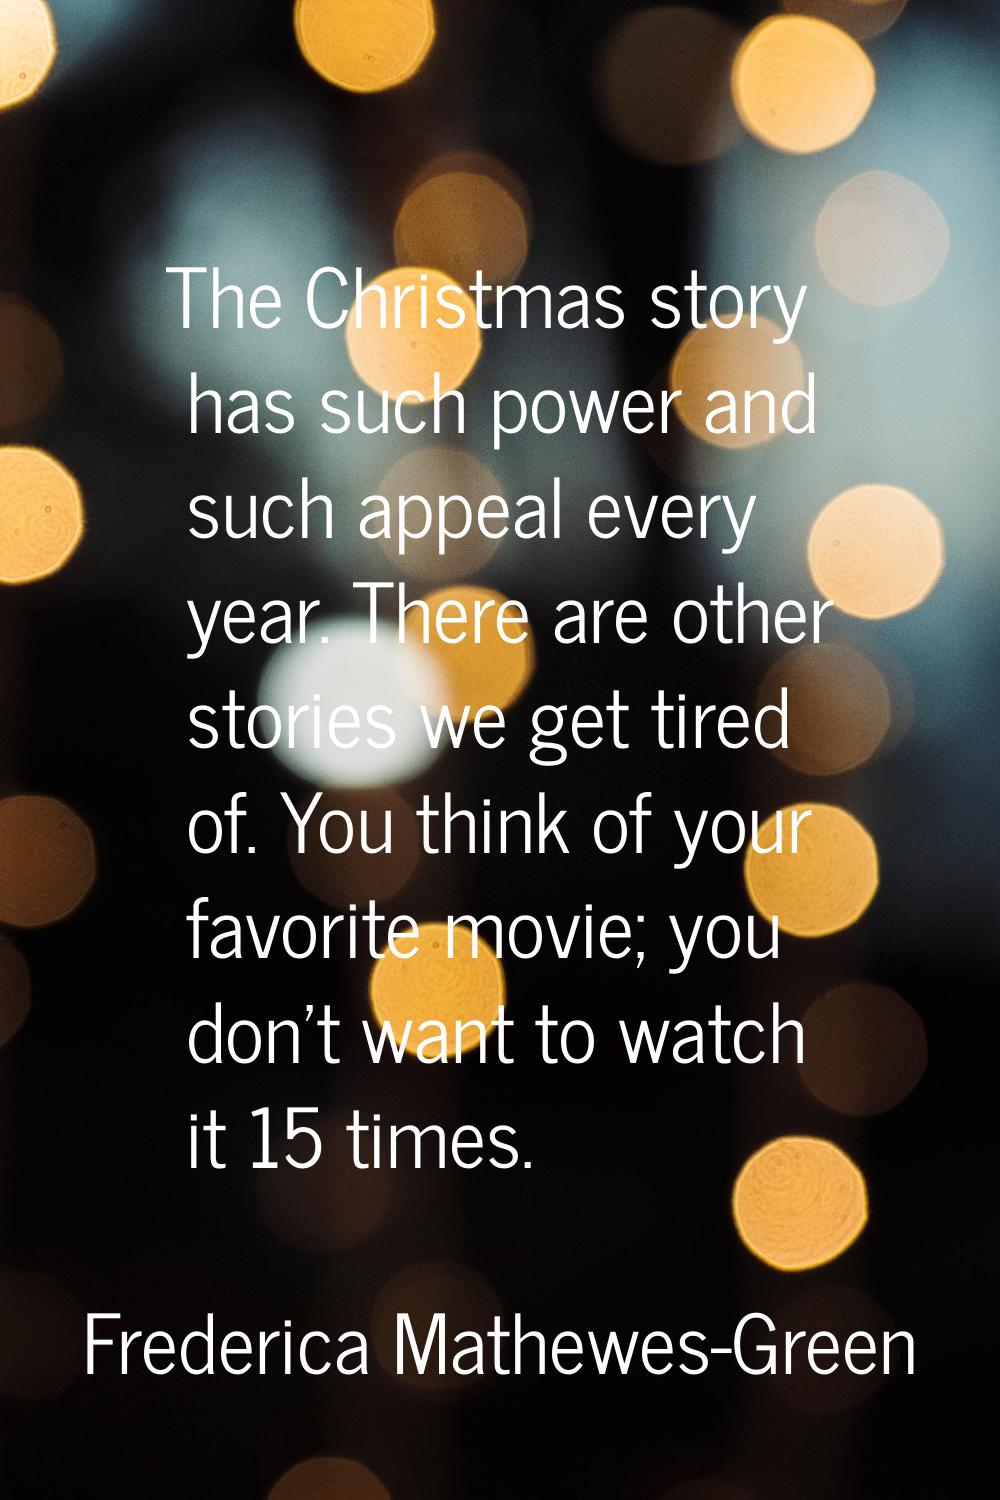 The Christmas story has such power and such appeal every year. There are other stories we get tired